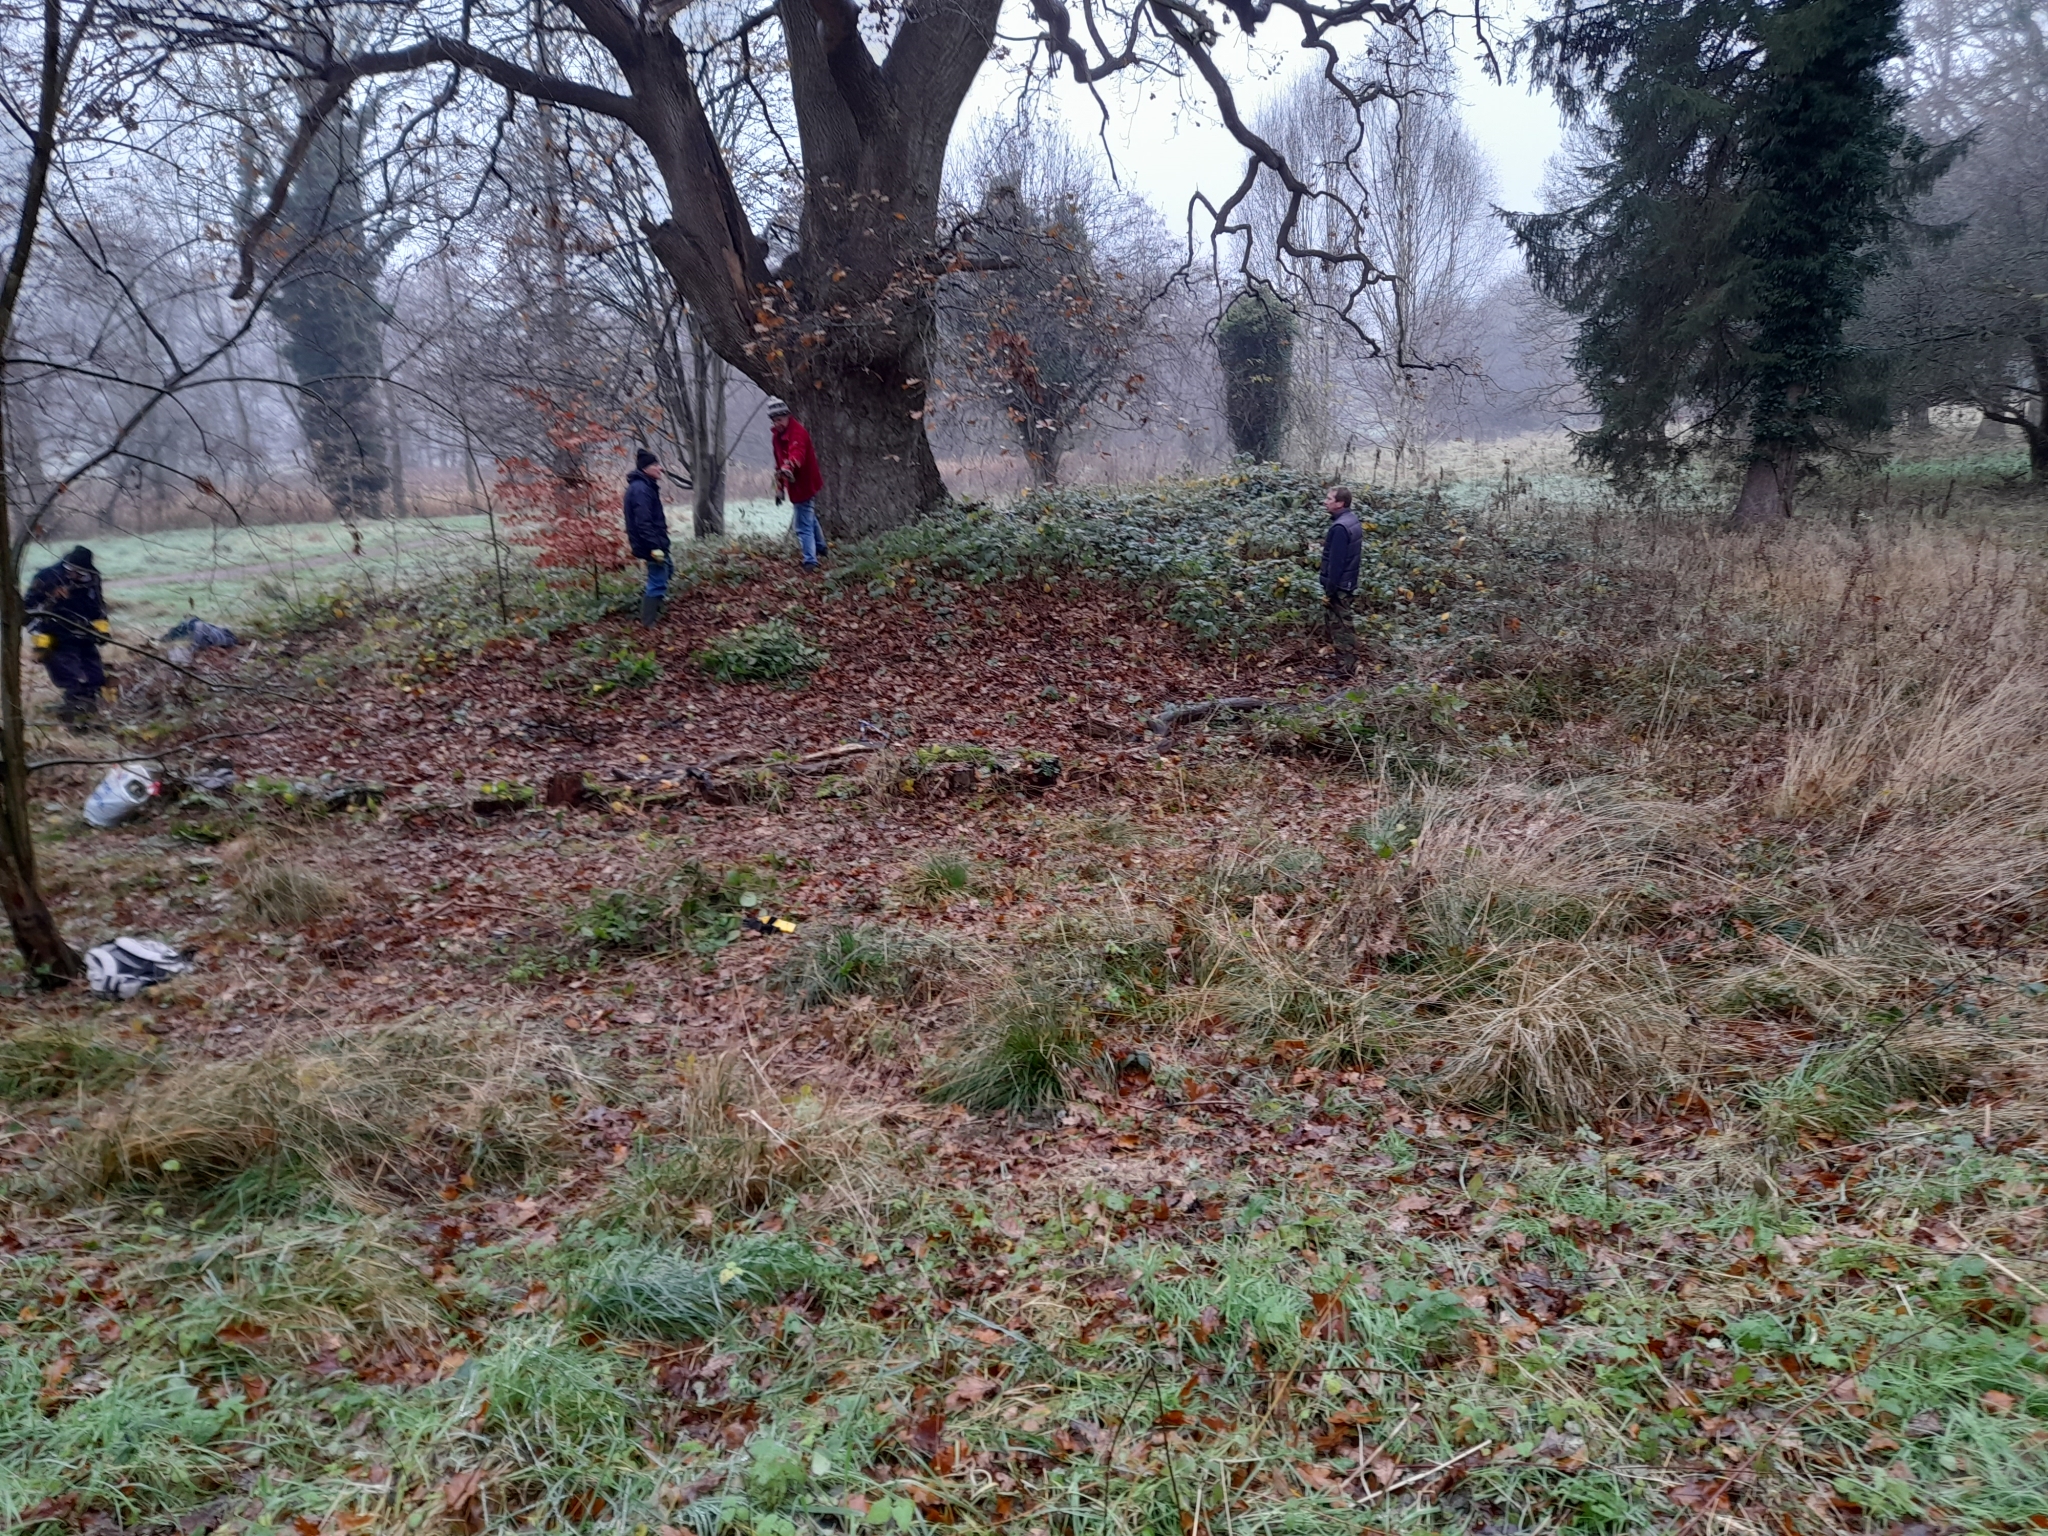 A photo from the FoTF Conservation Event - December 2021 - Self set sapling removal : Volunteers work around a tree, while remaining socially distanced